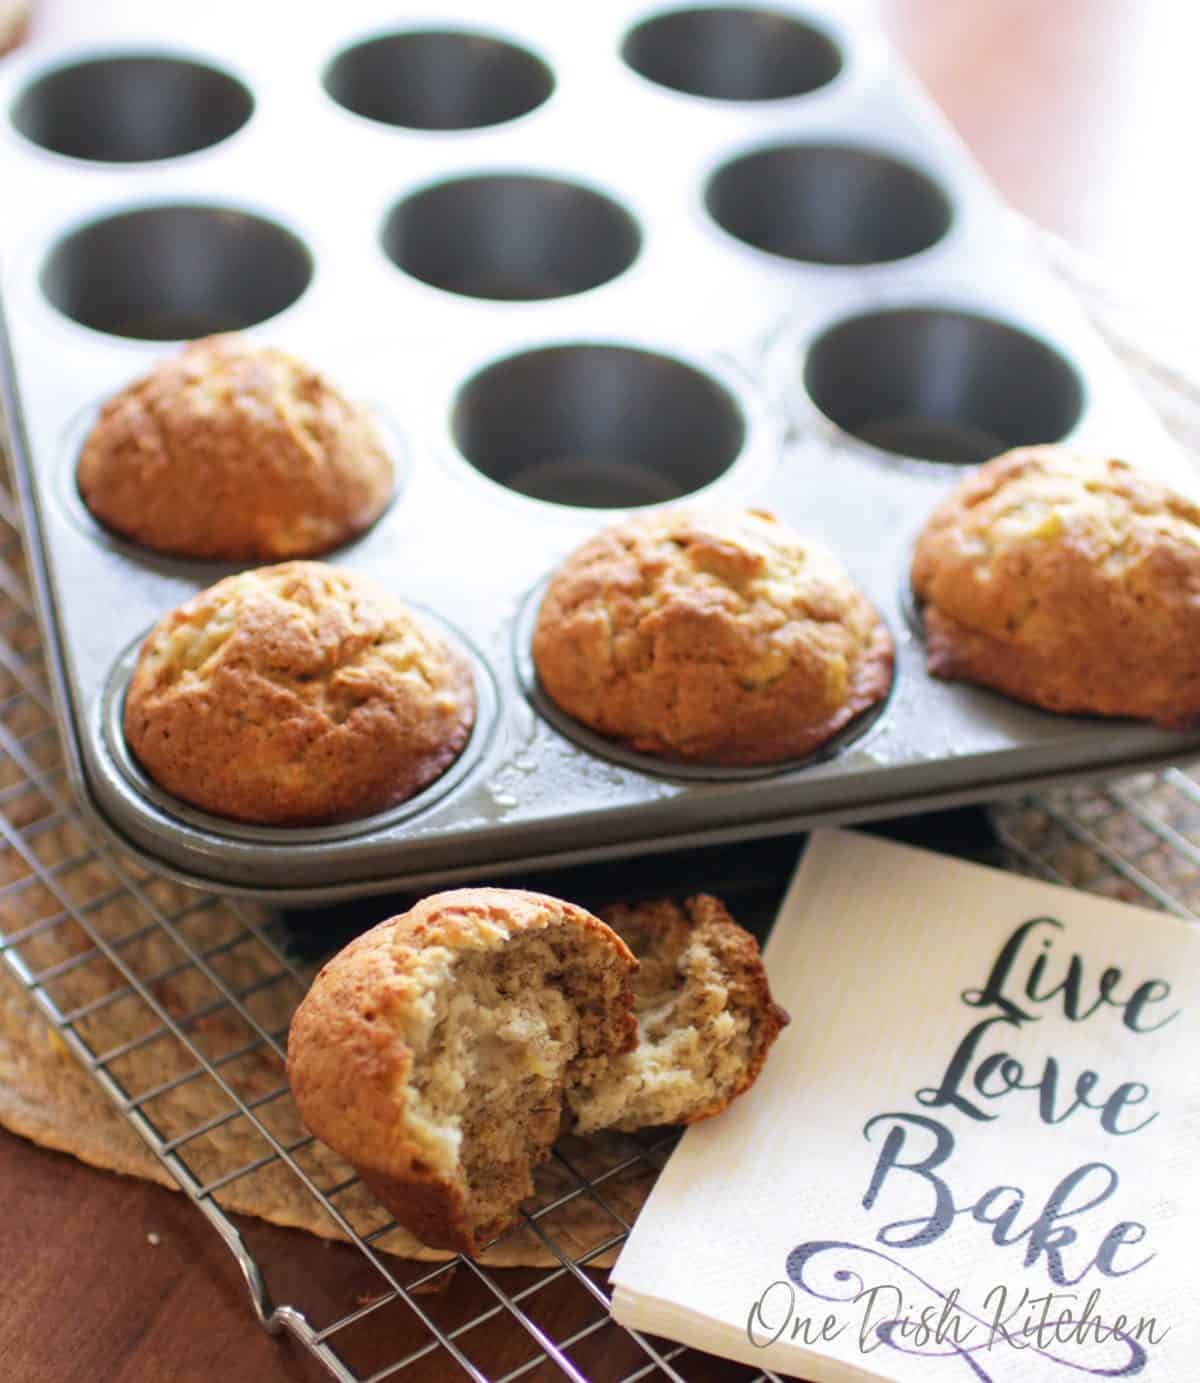 Four banana muffins in a muffin tin and a muffin split in half on a cooling rack.